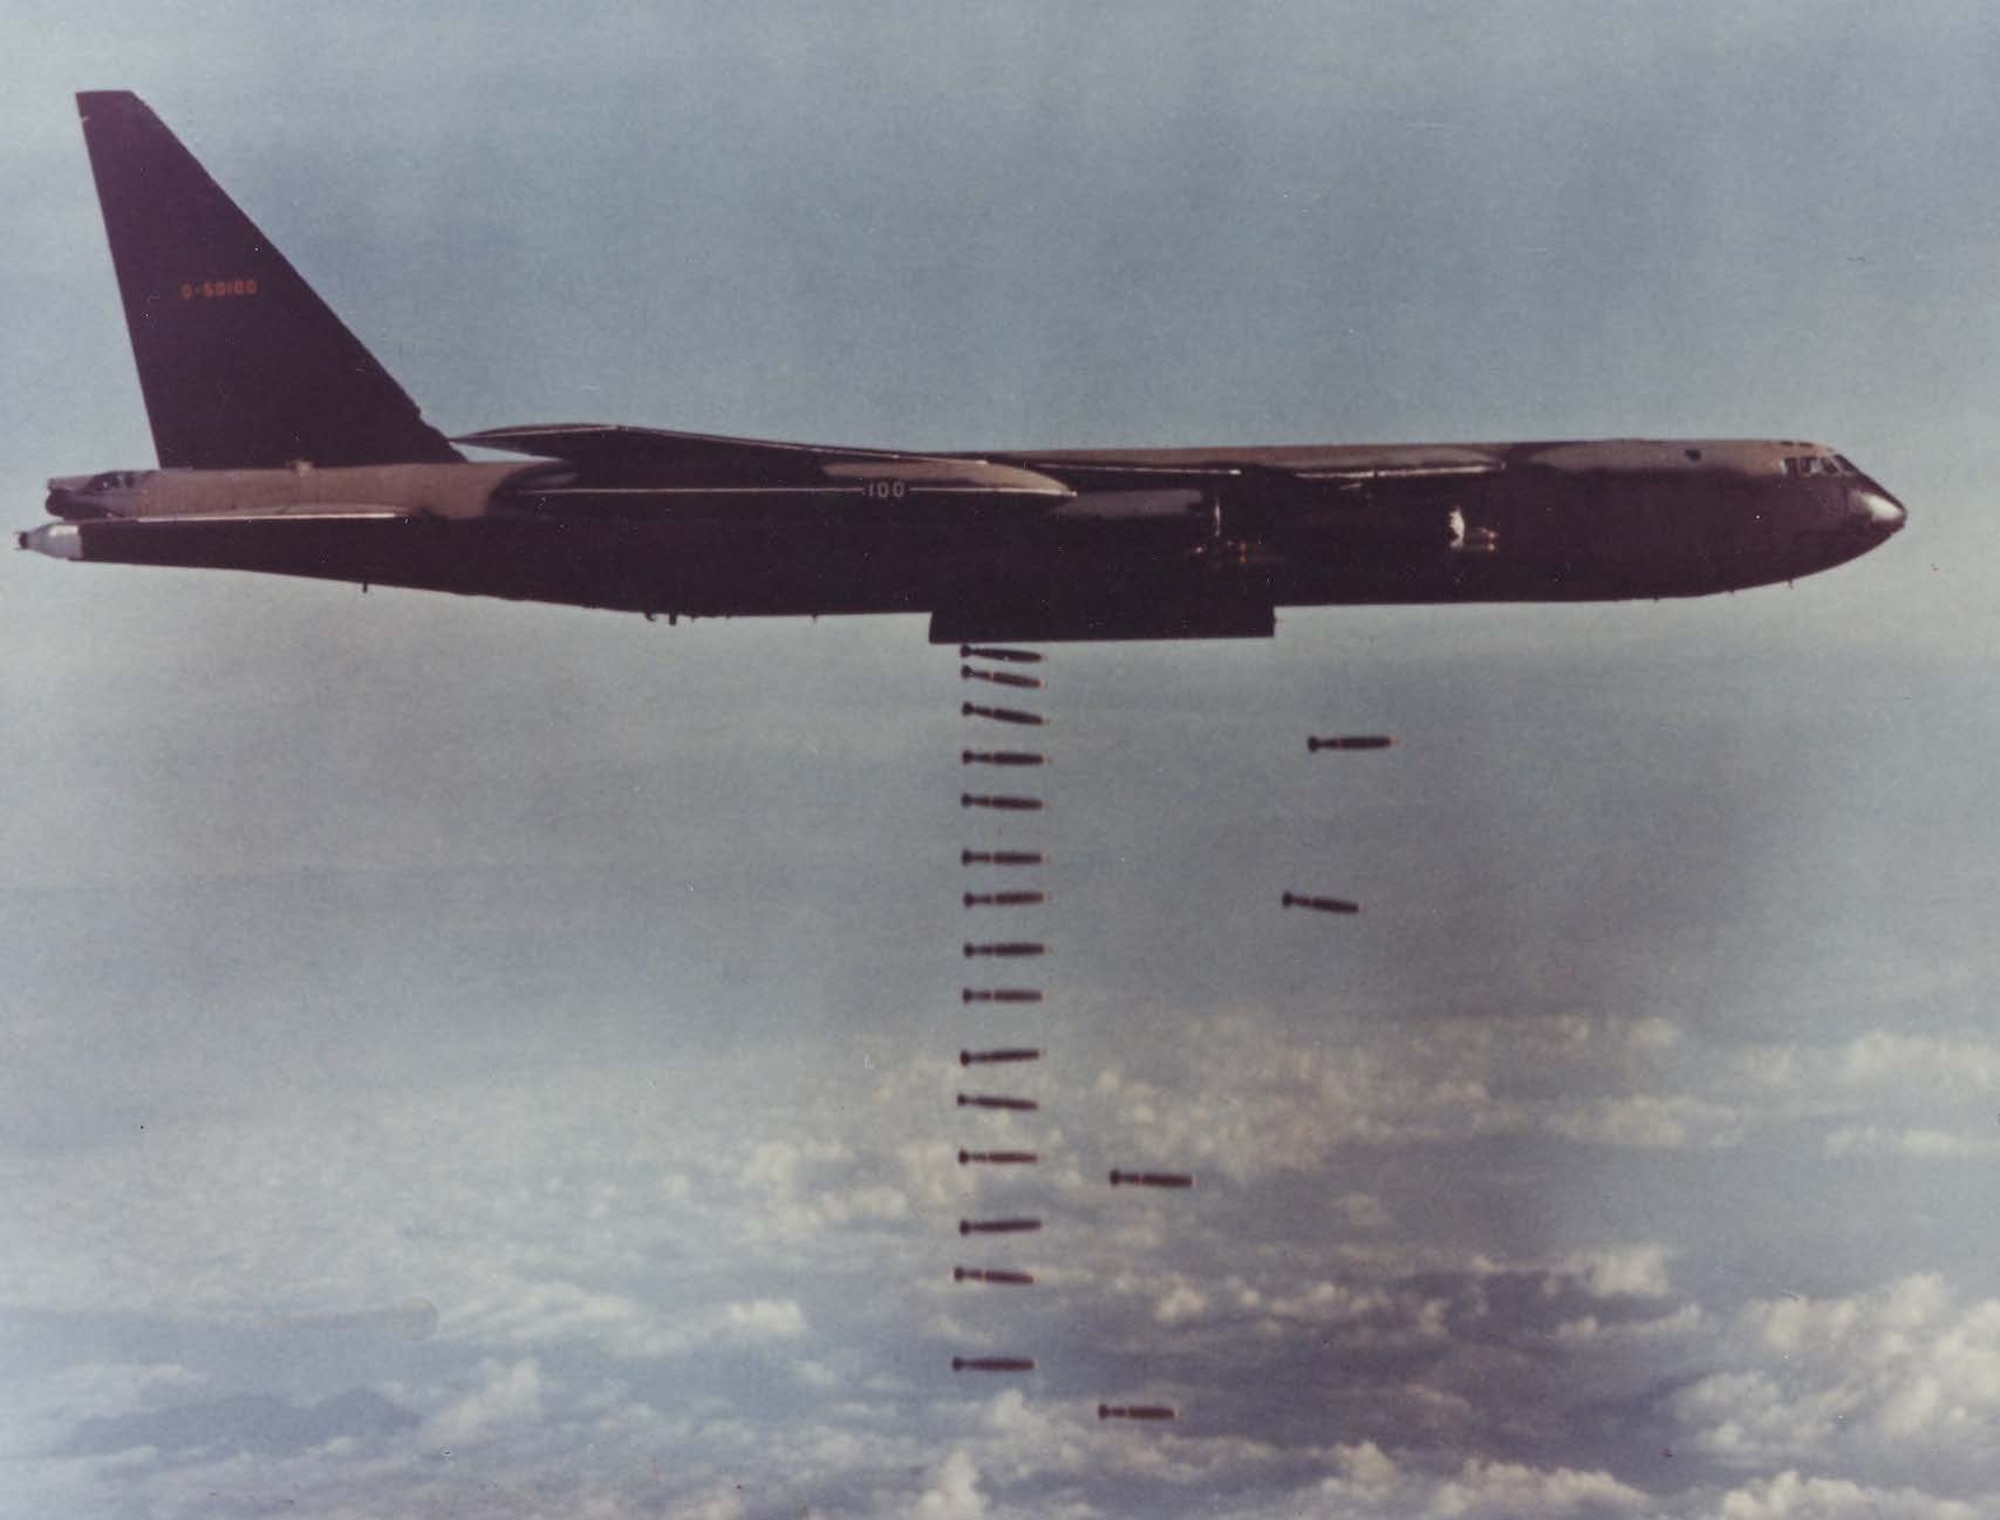 B-52 on bombing mission during Operation Linebacker